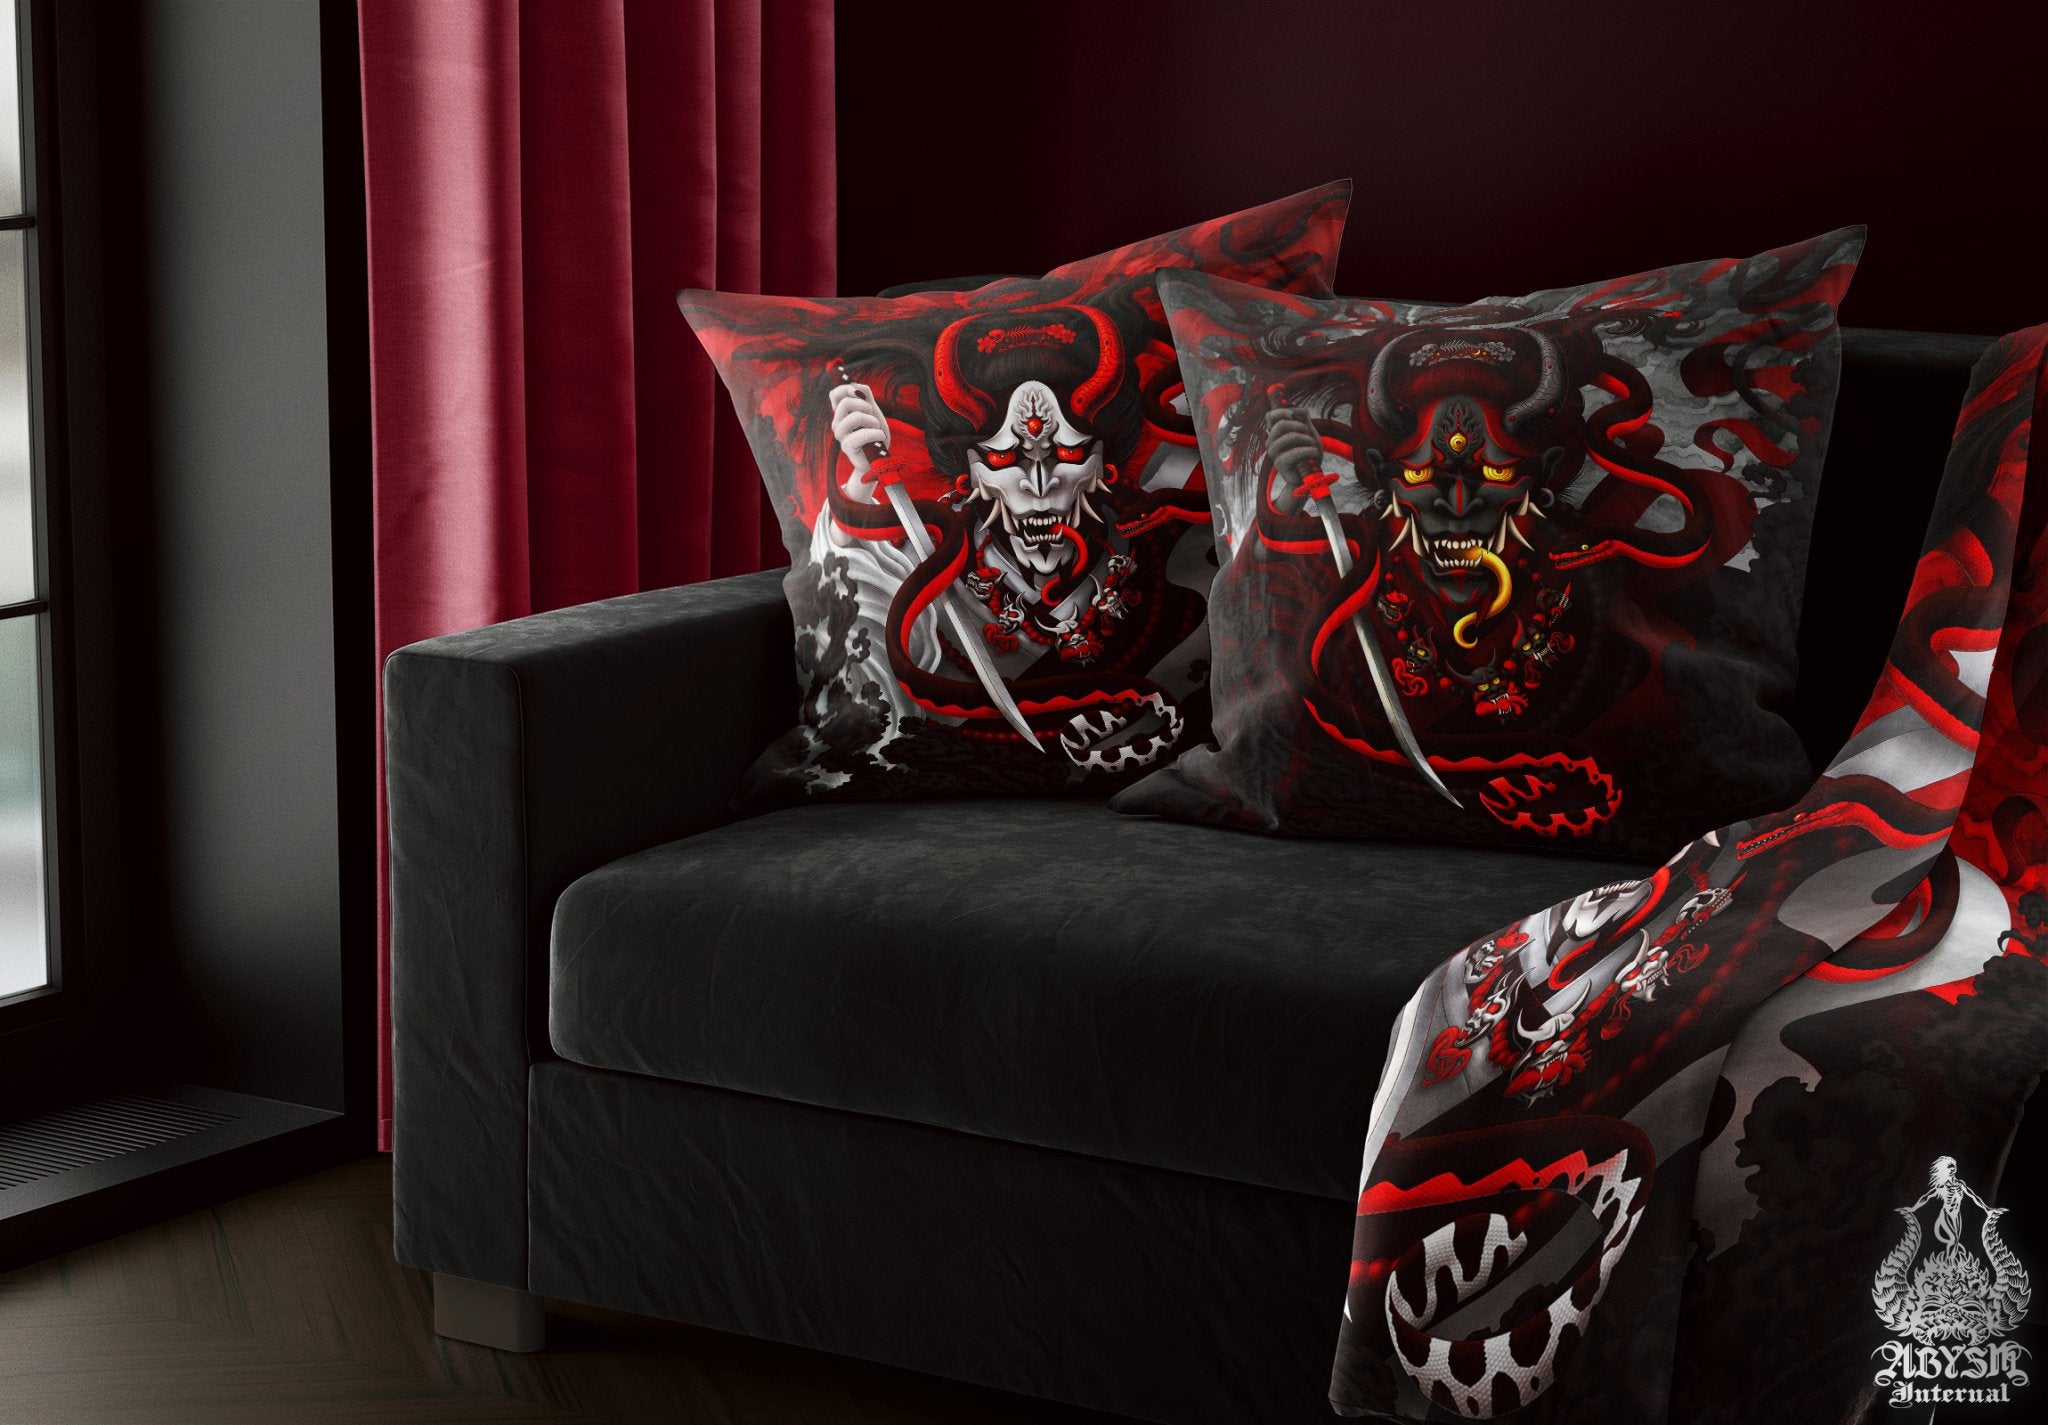 Bloody White Goth Throw Pillow, Decorative Accent Pillow, Square Cushion Cover, Red Hannya, Japanese Demon & Snake, Anime Room Decor - Abysm Internal